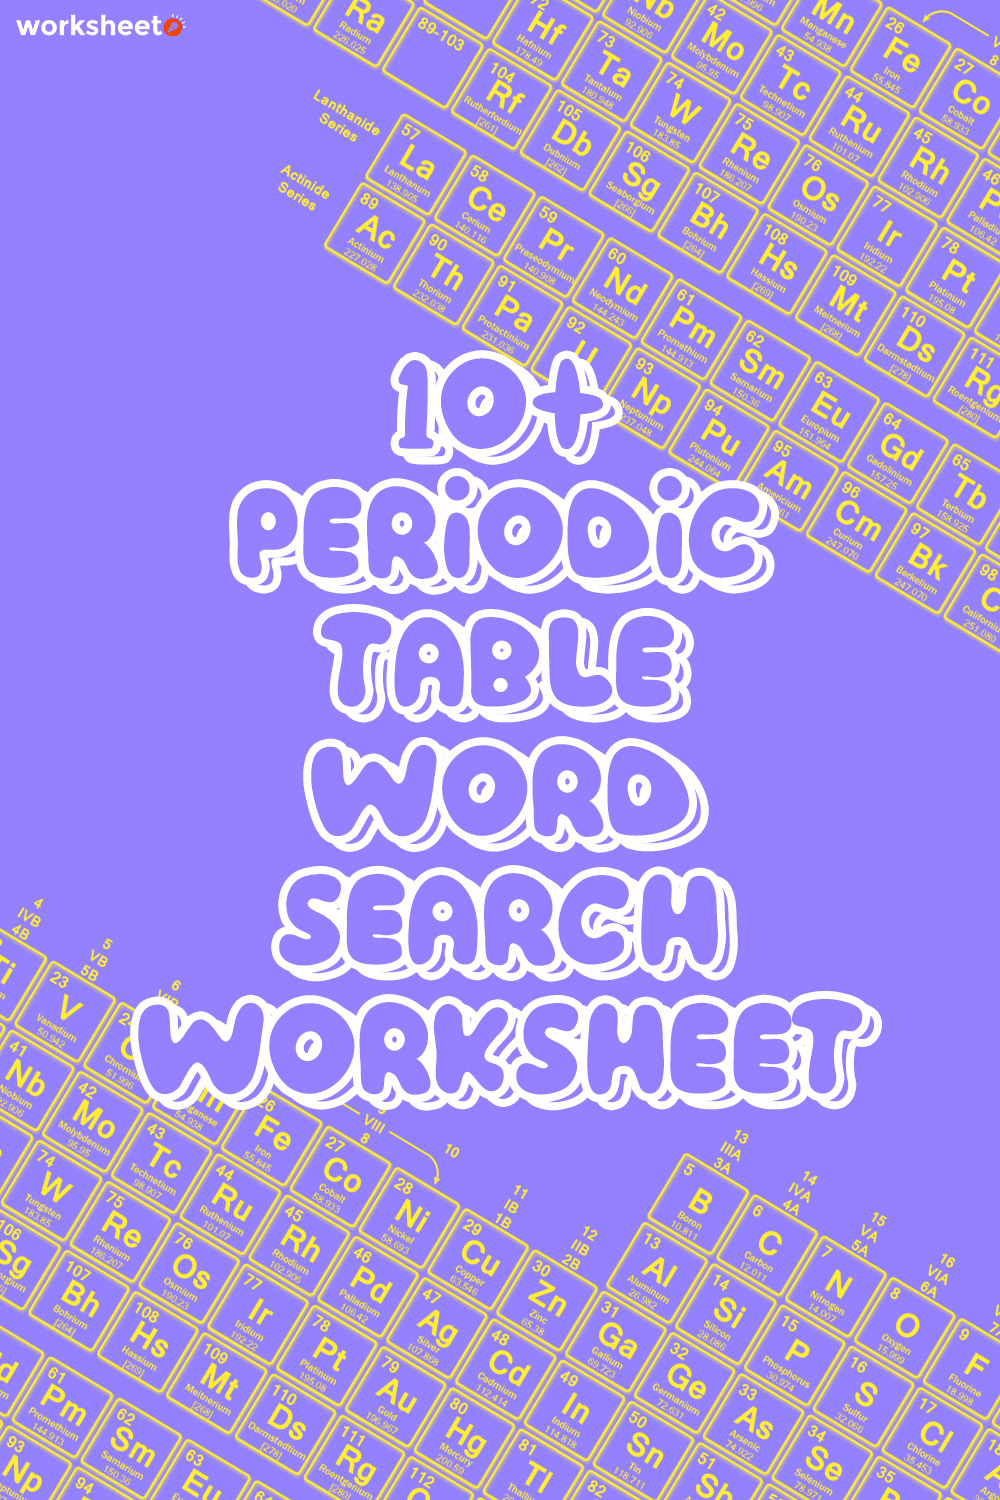 Periodic Table Word Search Worksheet